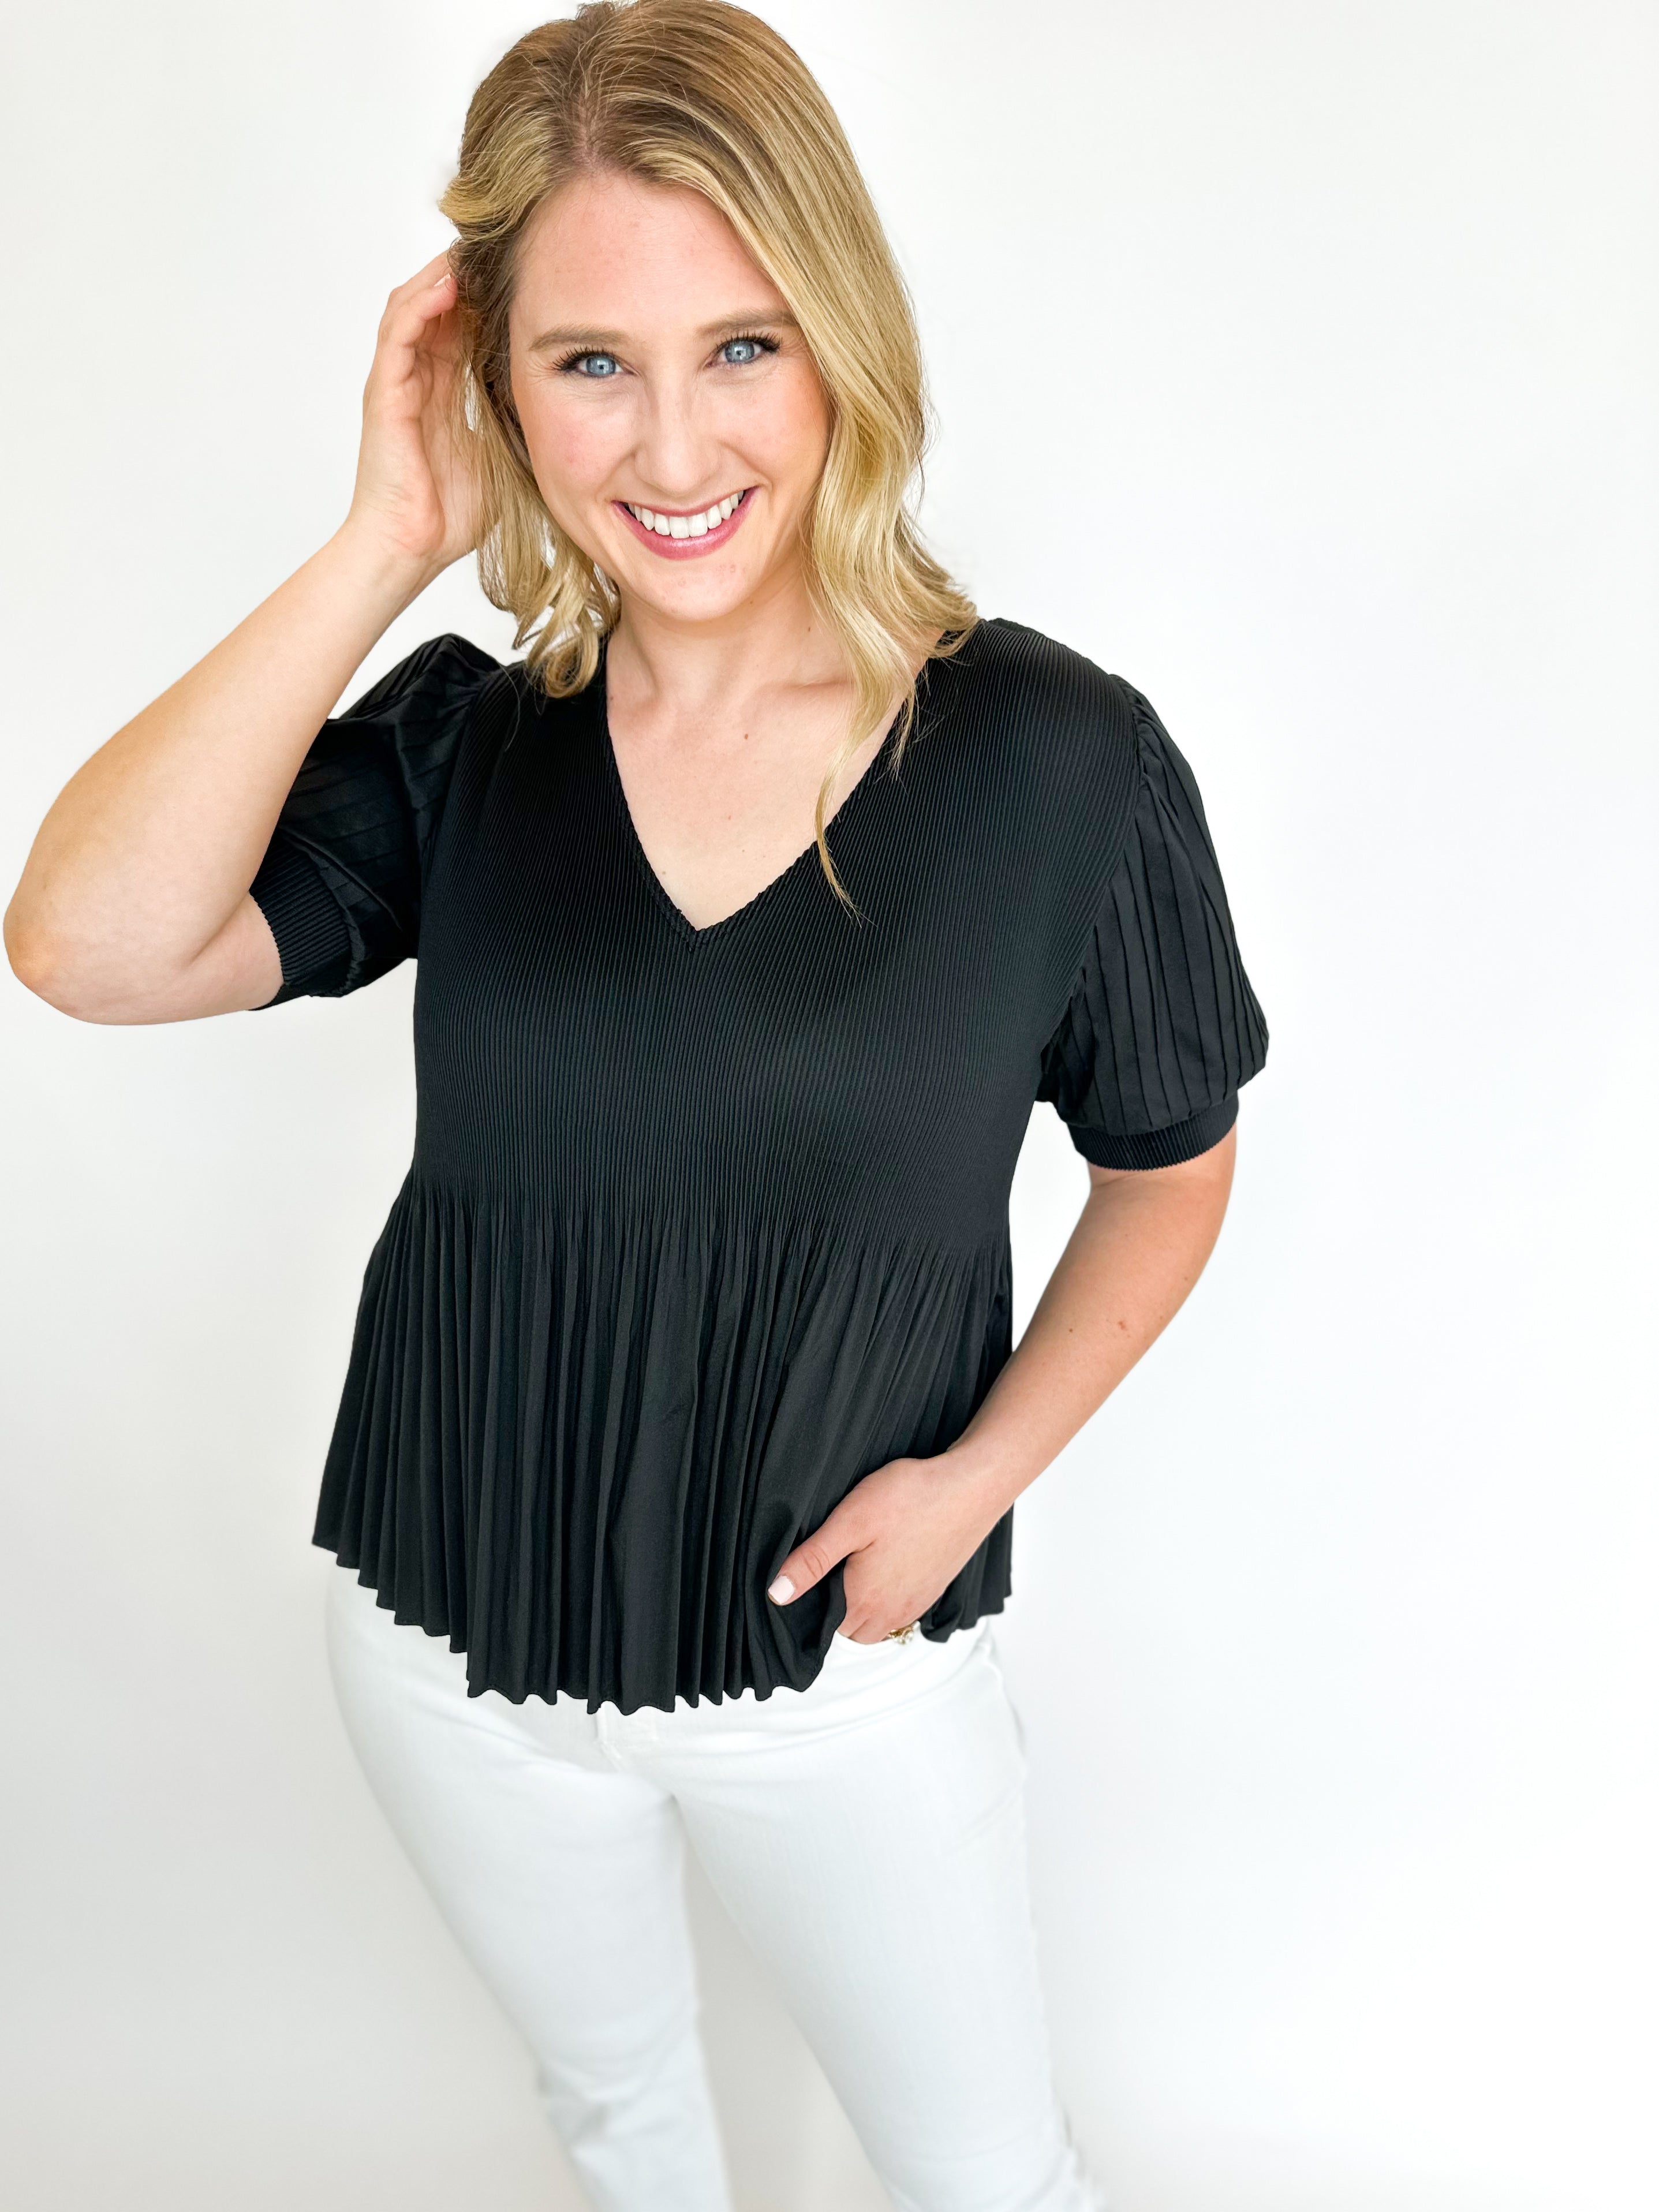 Pleated Peplum Blouse - Black-200 Fashion Blouses-CURRENT AIR CLOTHING-July & June Women's Fashion Boutique Located in San Antonio, Texas